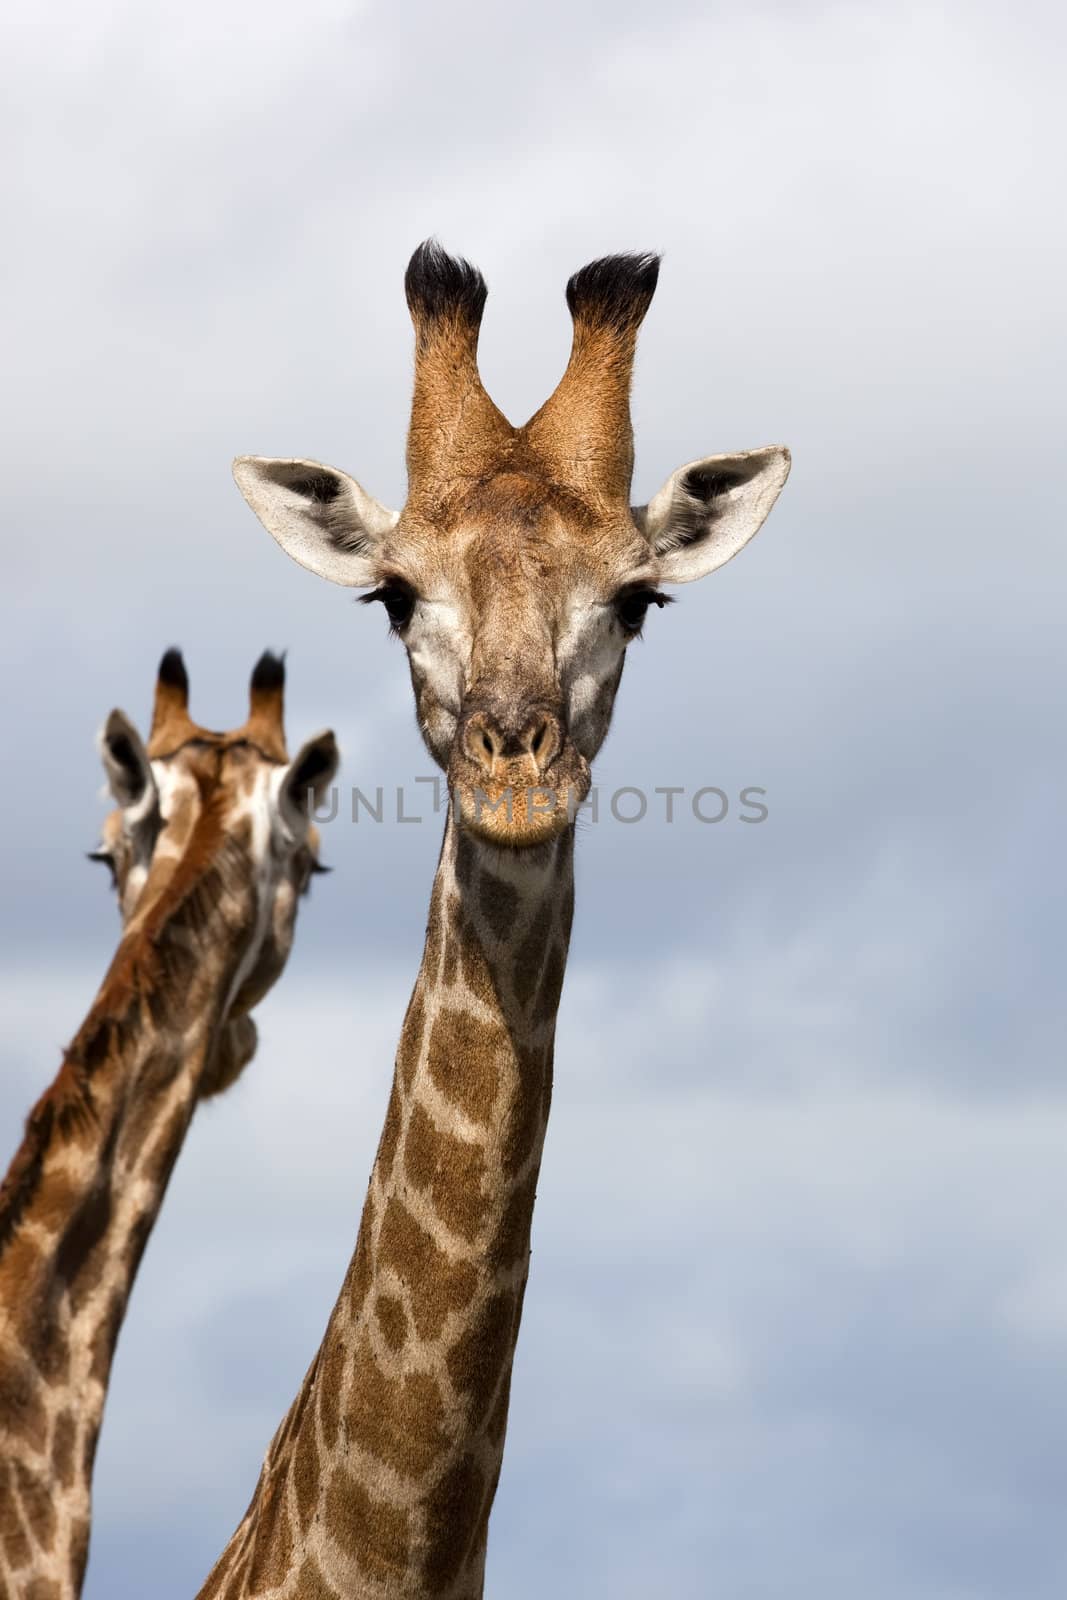 Two Giraffes with cloudy skies as background